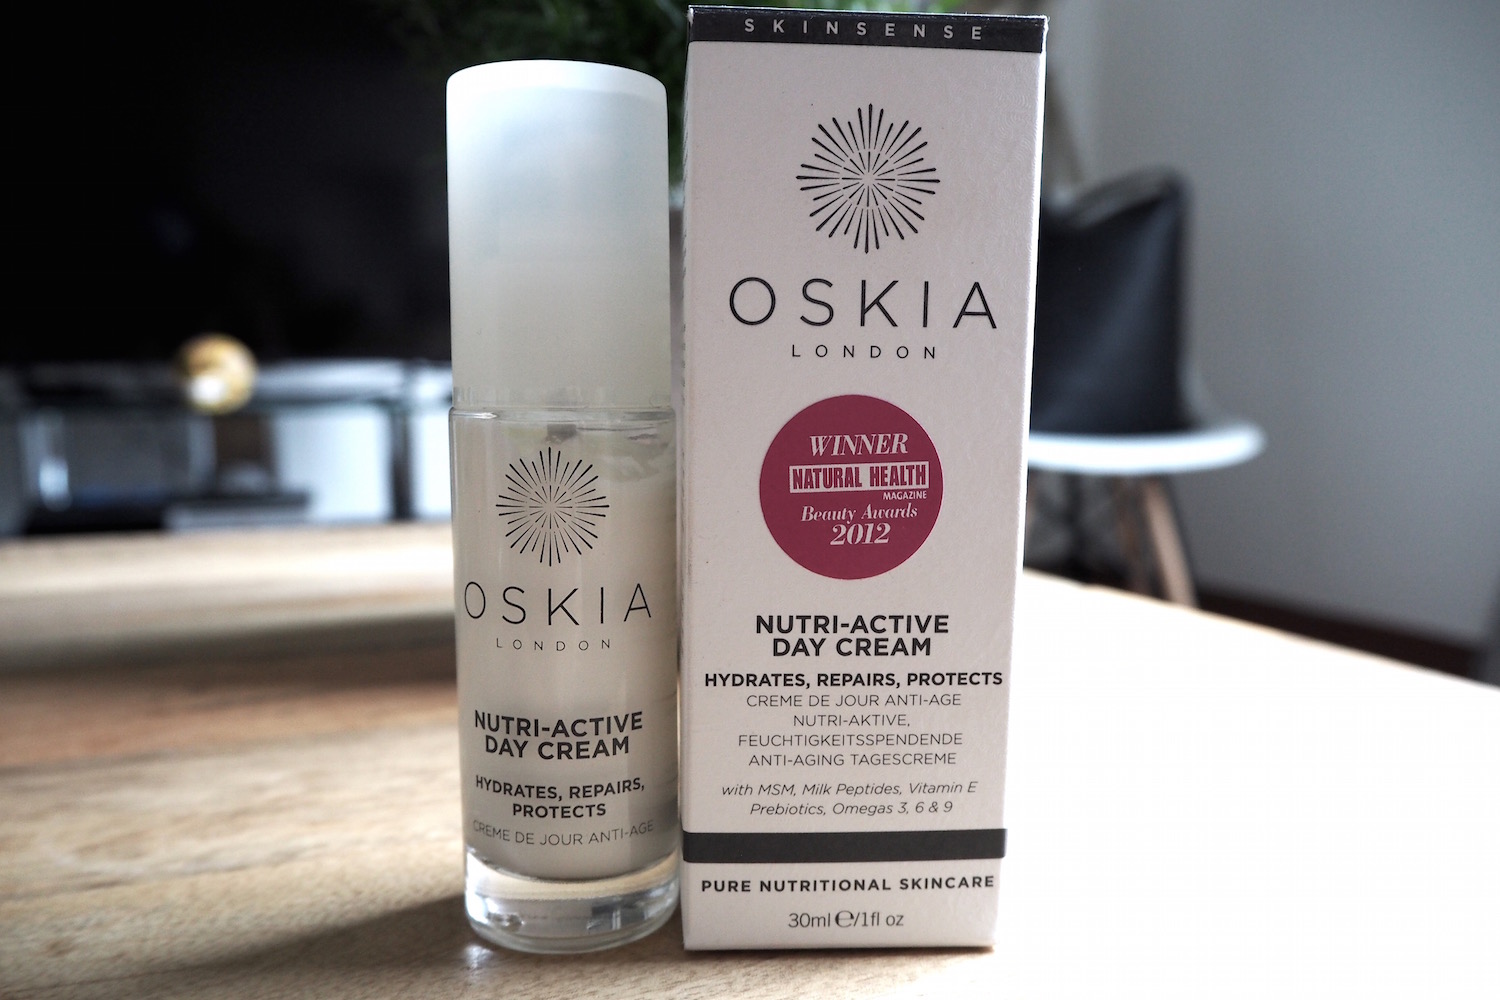 Beauty Review: Oskia Nutri-Active Day Cream